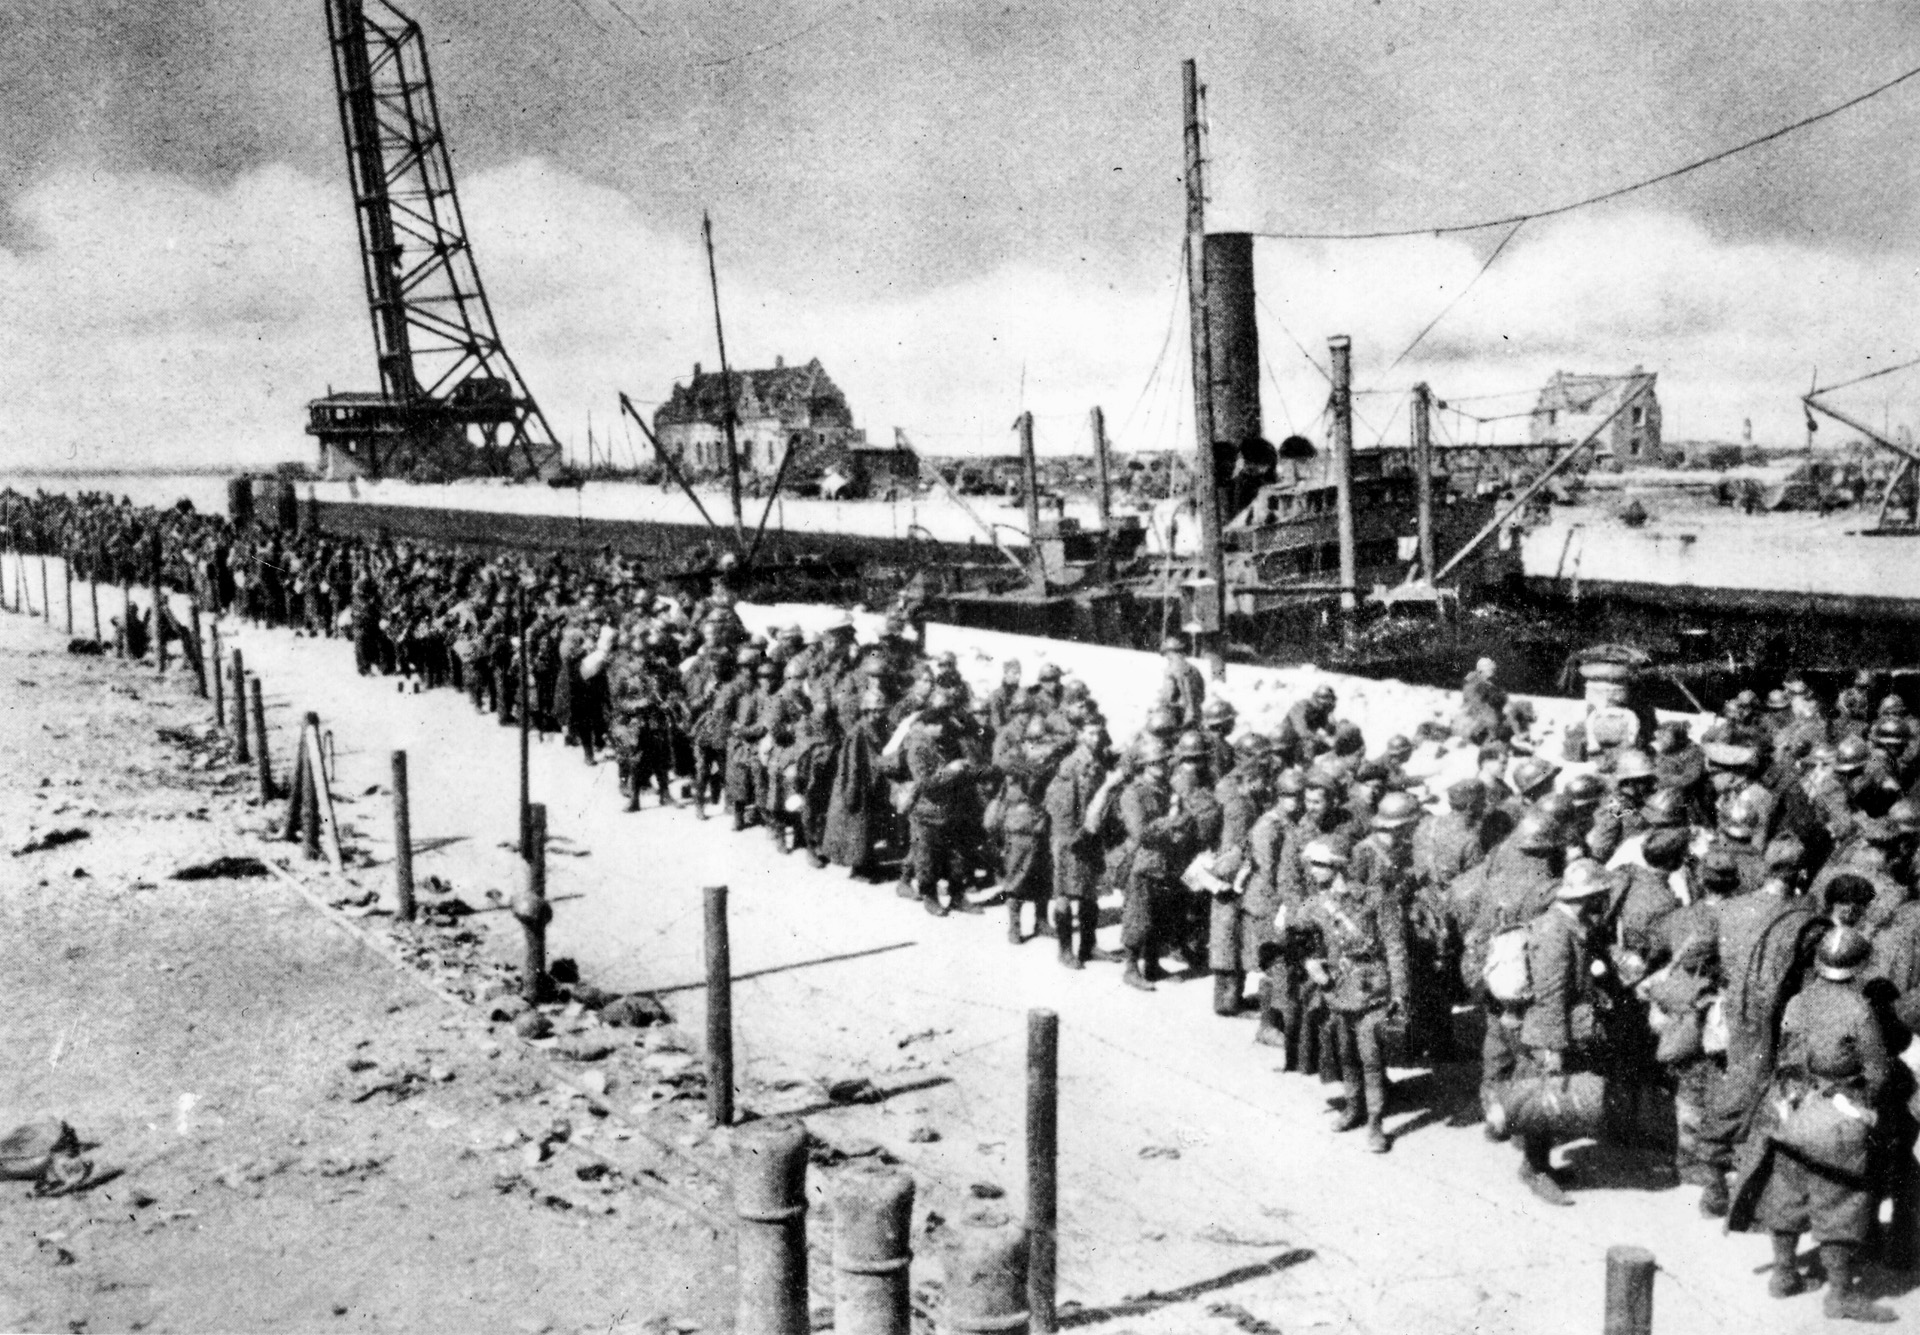 British and French soldiers await instructions from their captors on the now-calm beachfront. Many who fought the rearguard action at Dunkirk and were unable to escape the Germans became prisoners.